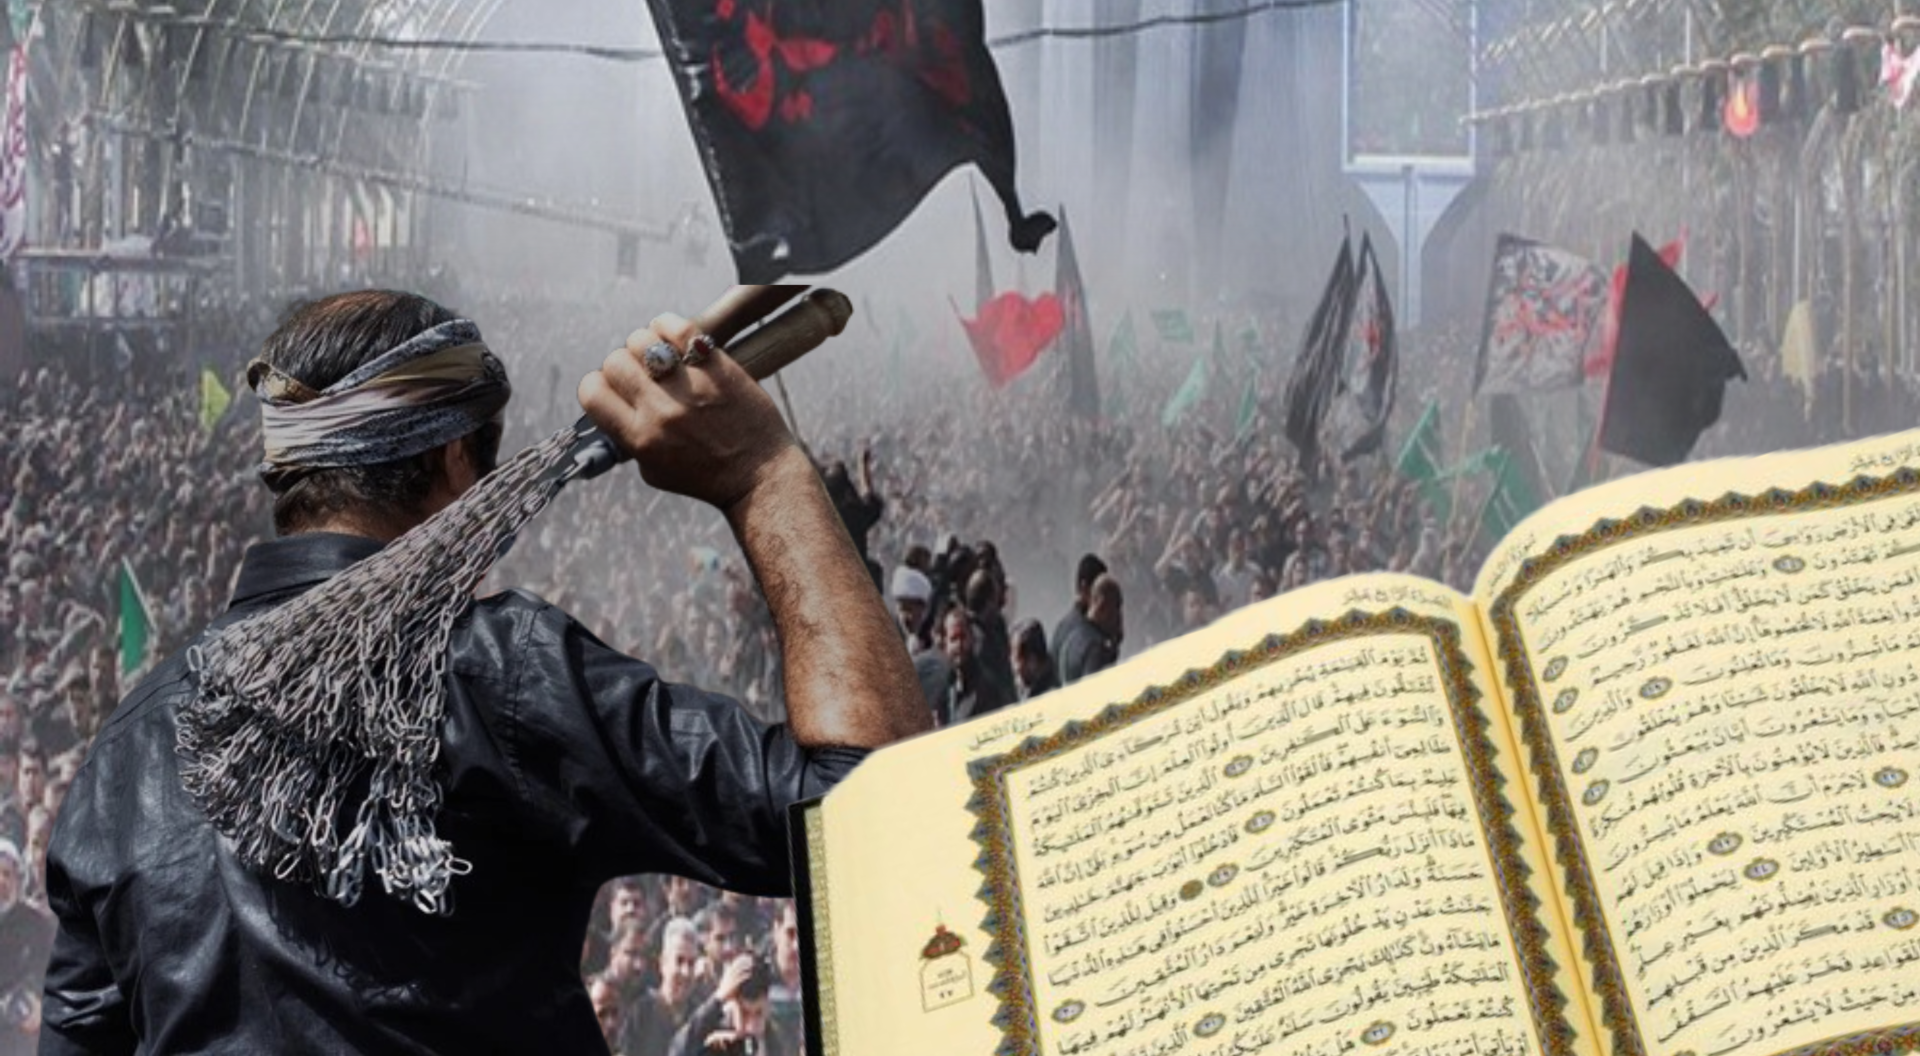 Self-torturing in Muharram, month in Islamic calendar - And what is real Islam? [COMMENTARY]